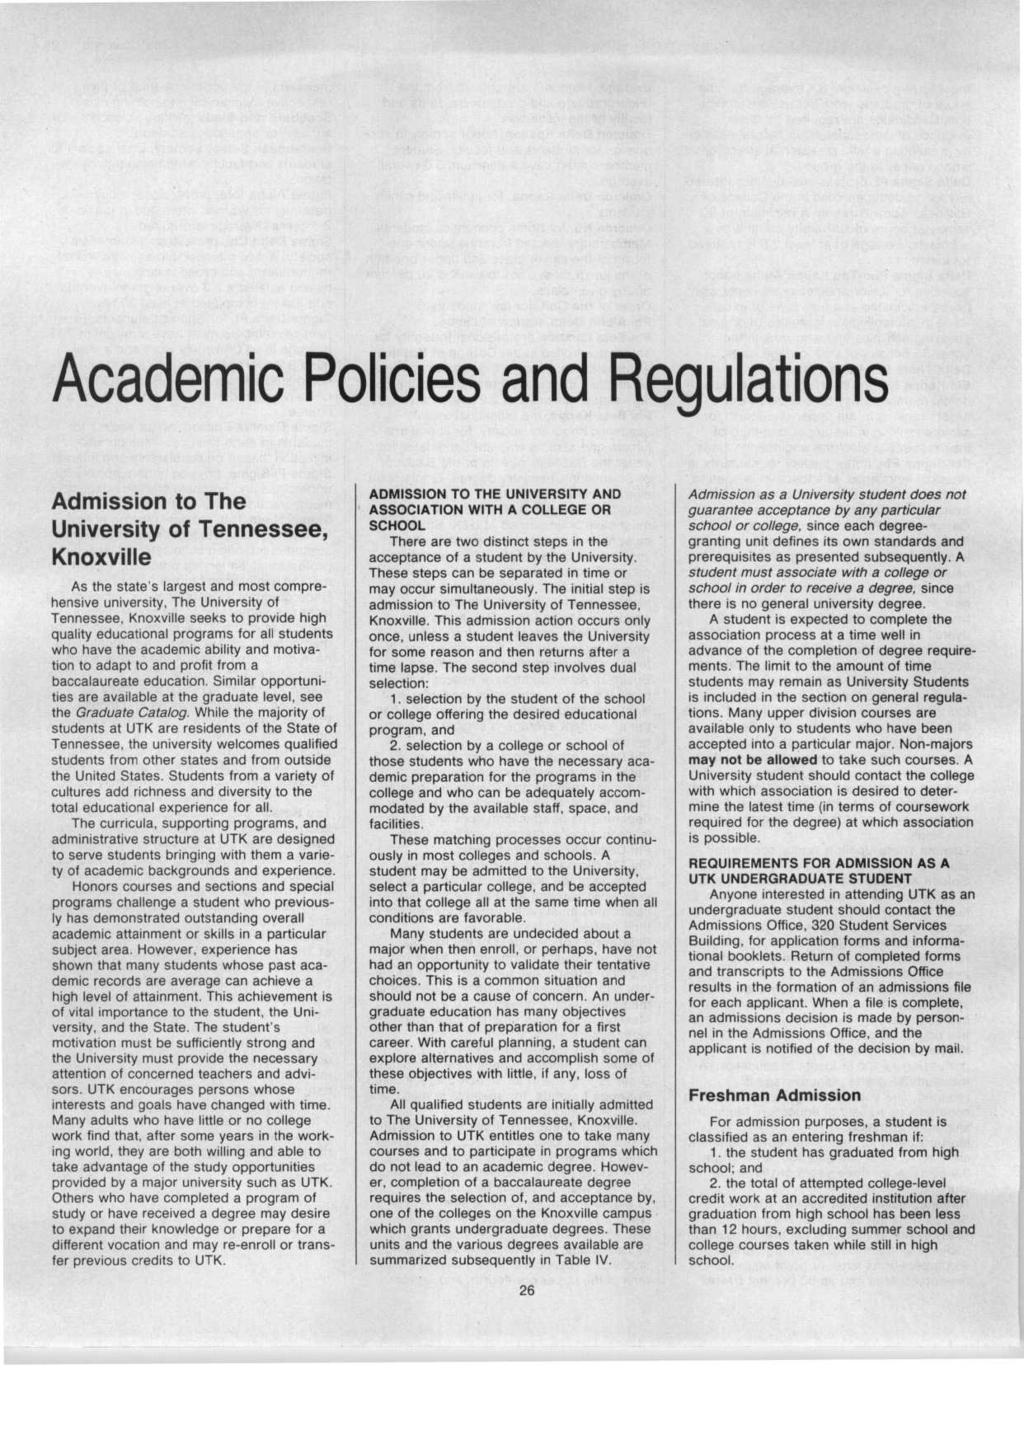 Academic Policies and Regulations Admission to The University of Tennessee, Knoxville As the state's largest and most comprehensive university, The University of Tennessee, Knoxville seeks to provide